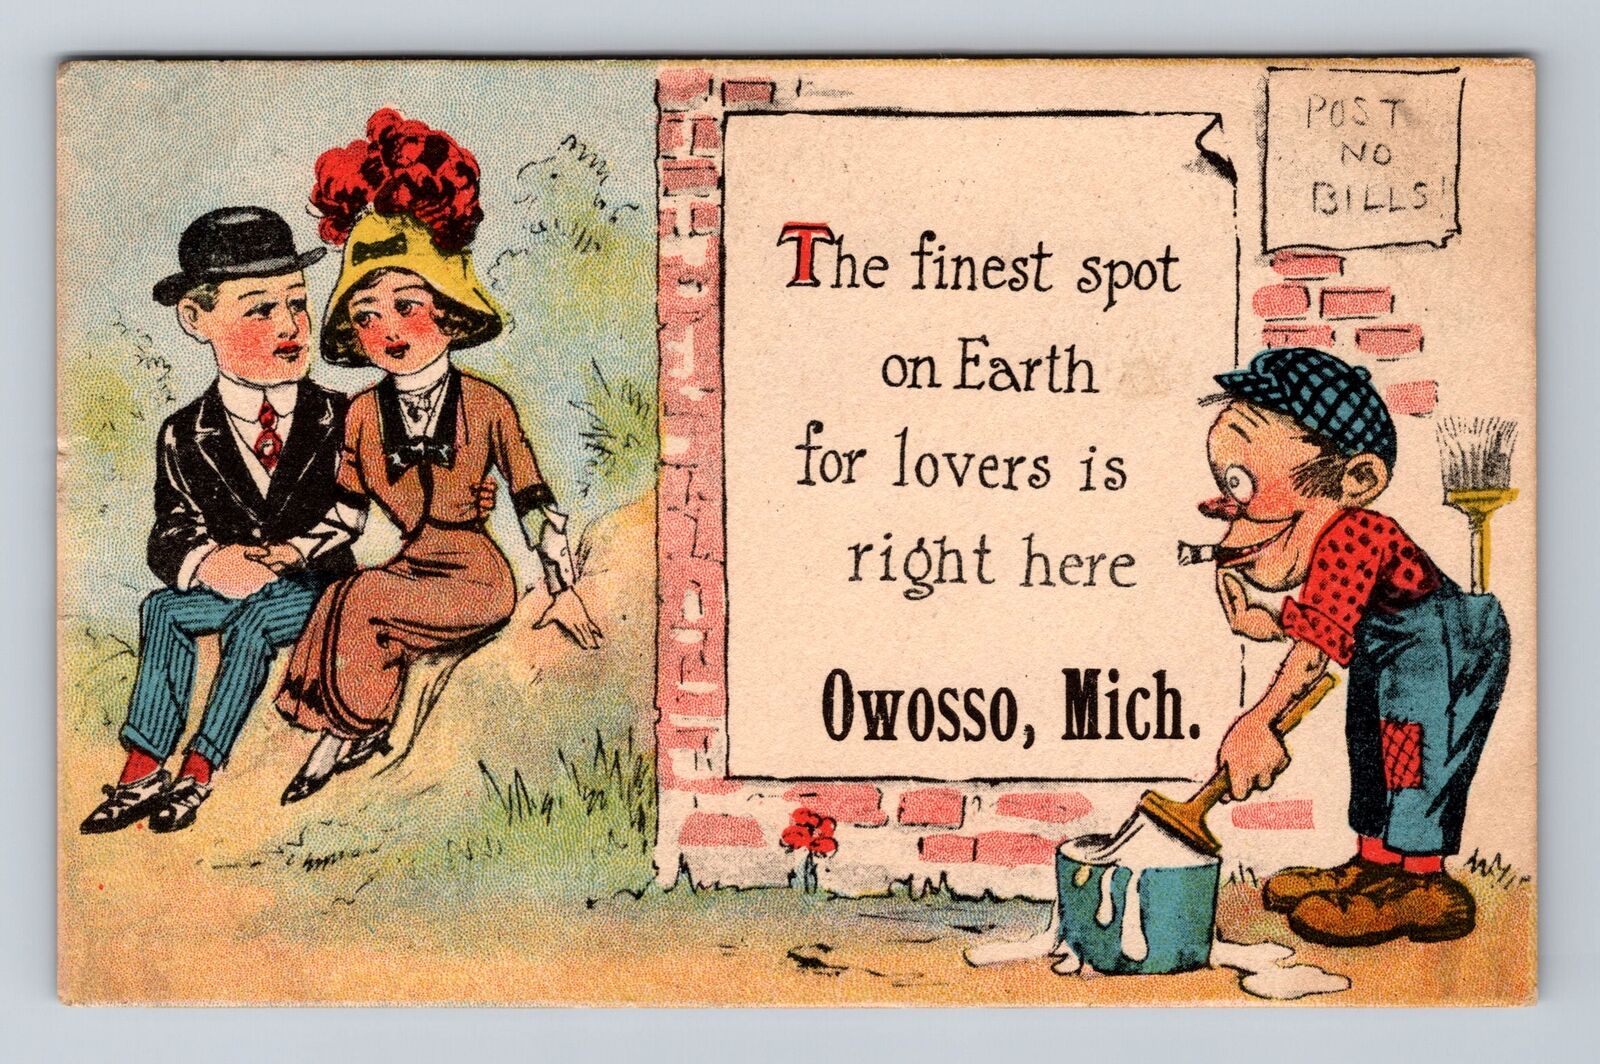 Owosso MI-Michigan, Finest Spot On Earth For Lovers, Vintage c1913 Postcard